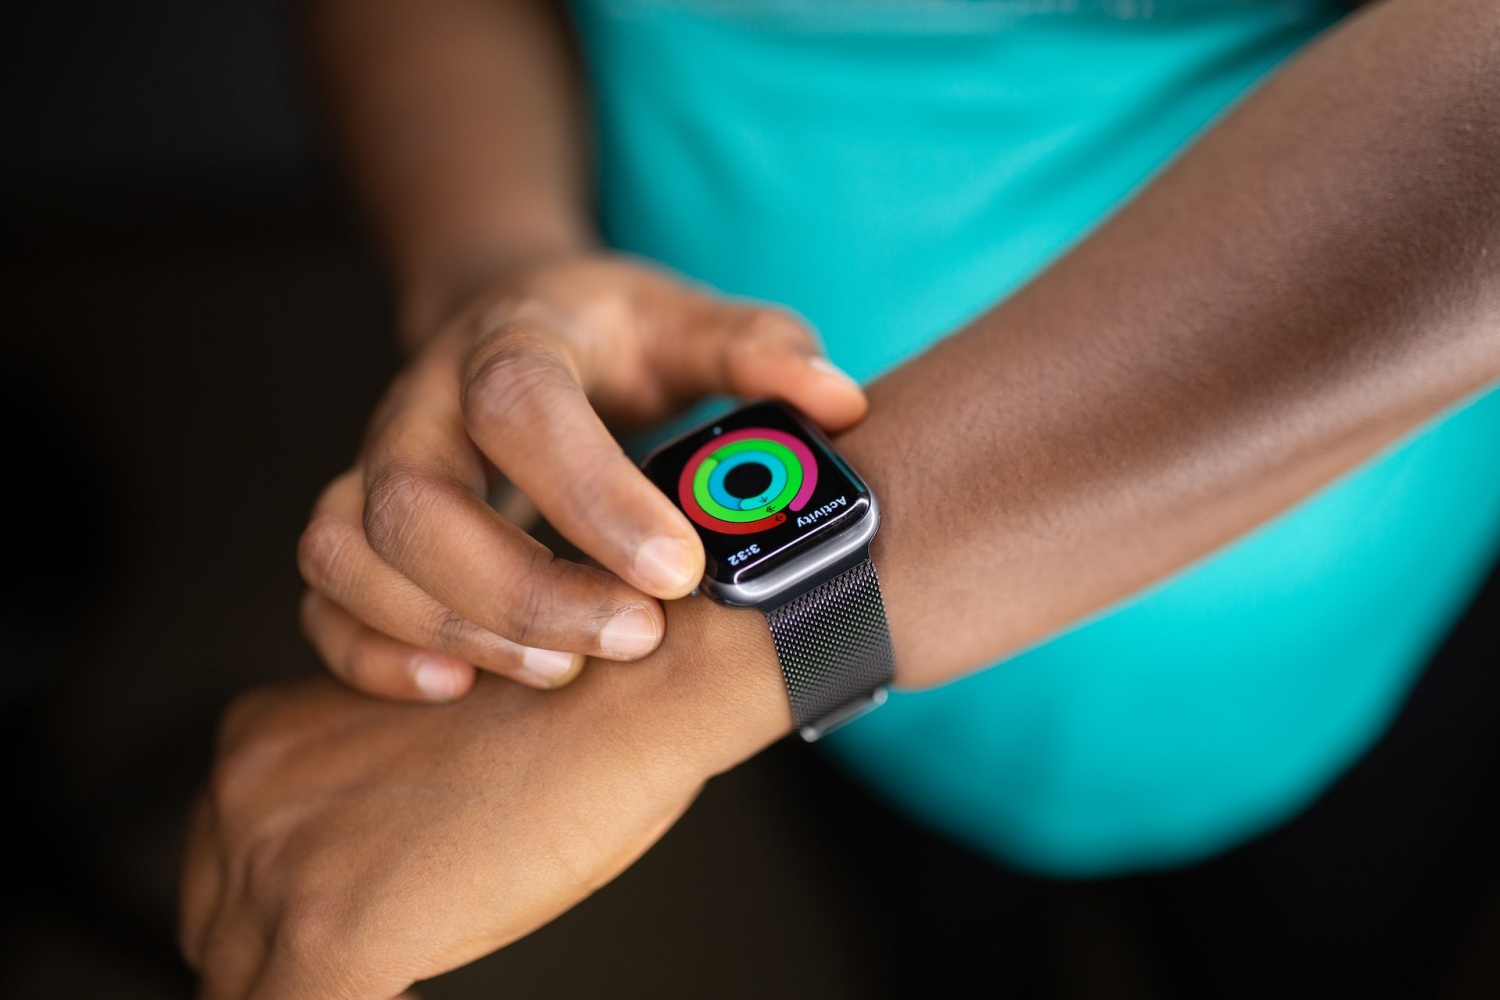 Study Says Apple Watch Can Predict Pain for People With Sickle Cell Disease | Tech Times